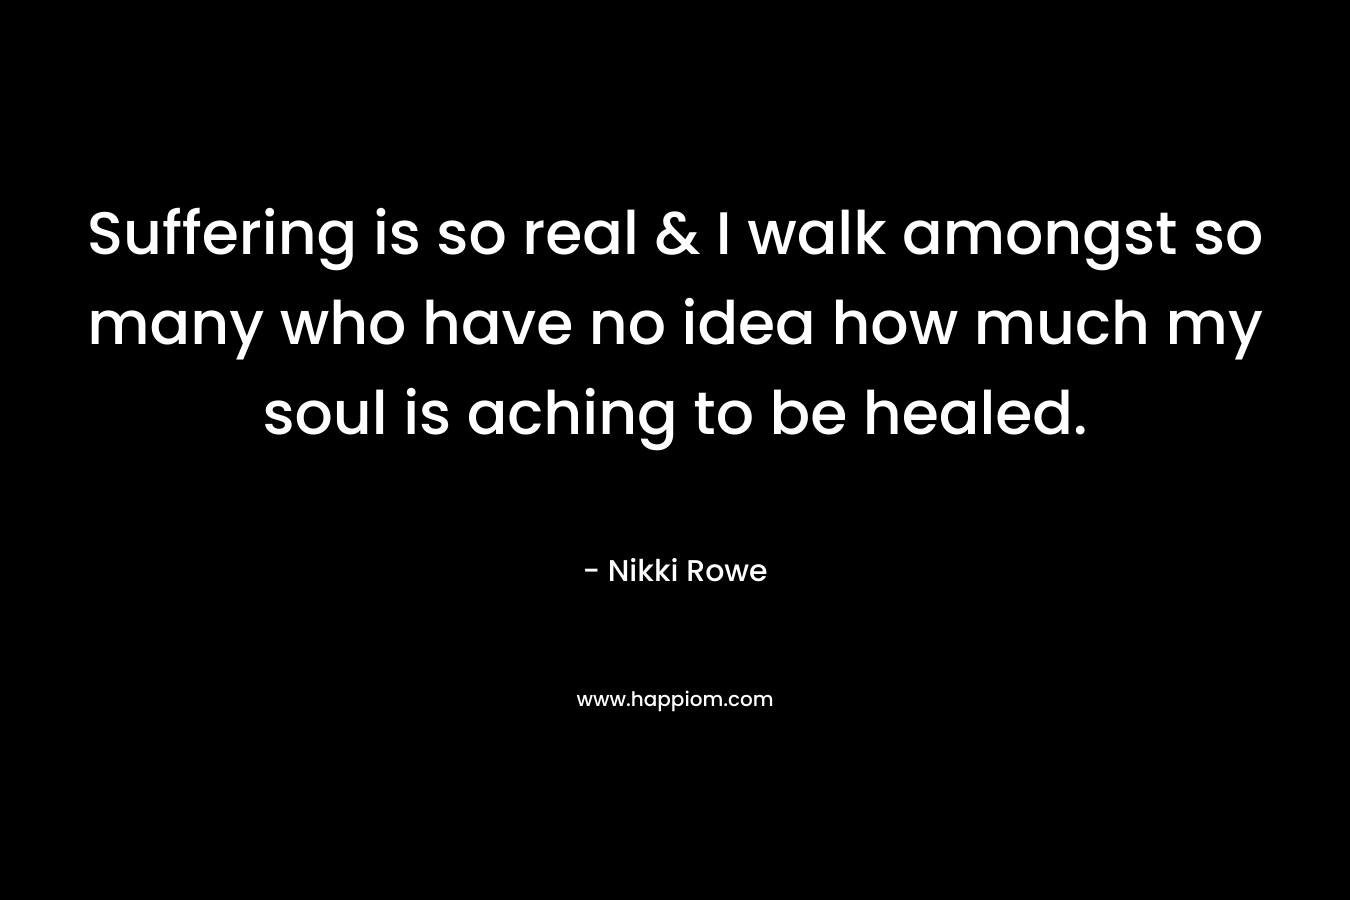 Suffering is so real & I walk amongst so many who have no idea how much my soul is aching to be healed. – Nikki Rowe